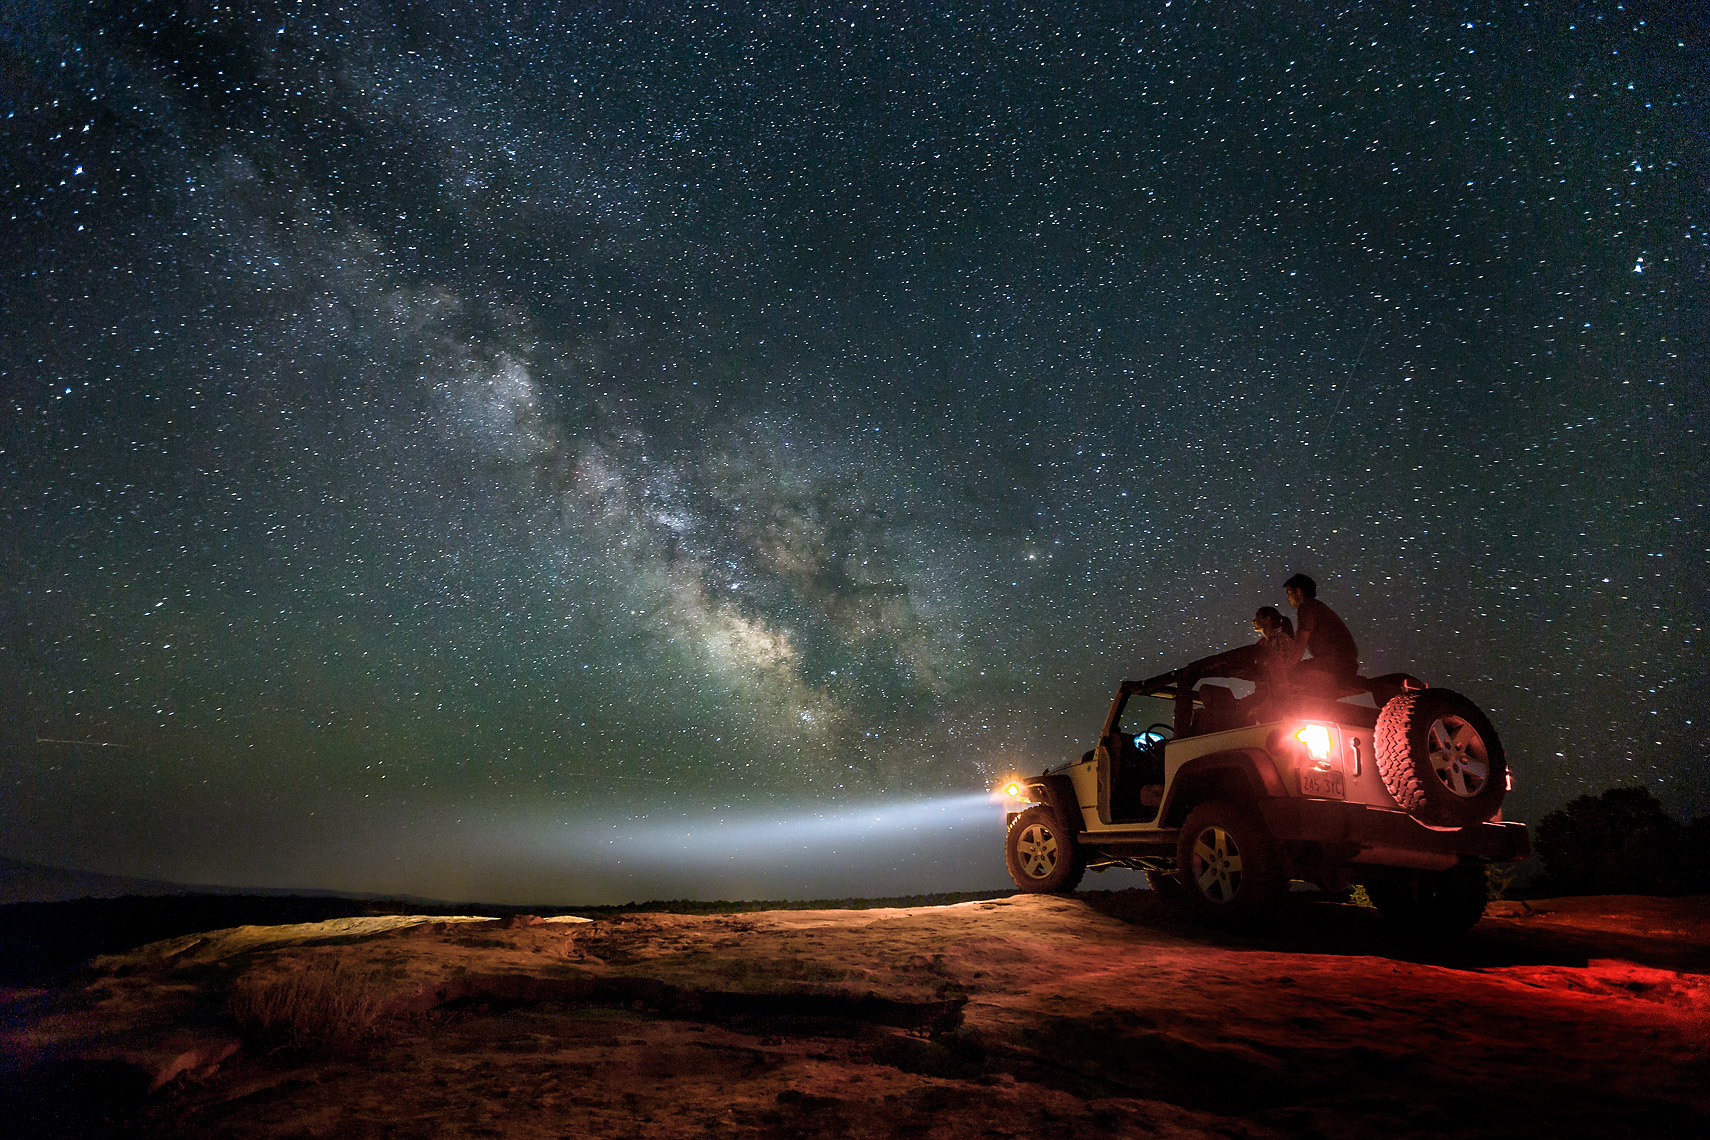 photographing the milky way